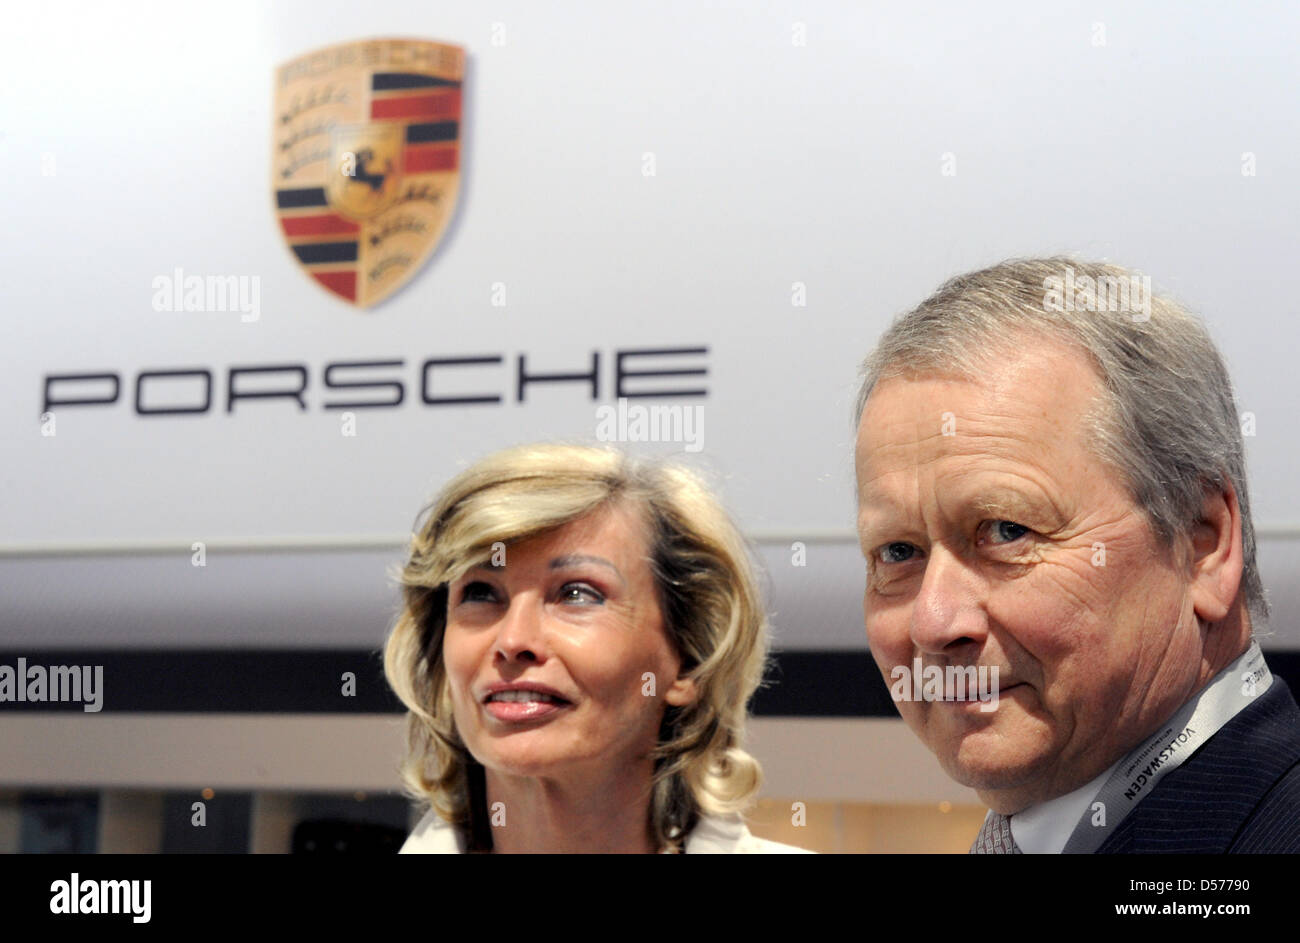 Wolfgang Porsche, chairman of the Porsche supervisory board, and his life partner Claudia Huebner pictured at the Porsche stand in the showroom prior to the general meeting of Volkswagen AG in Hamburg, Germany, 22 April 2010. Europe's largest automaker Volkswagen increased its profits in the first quarter of 2010. The earnings after taxes increased by nearly 95 per cent to 473 mill Stock Photo